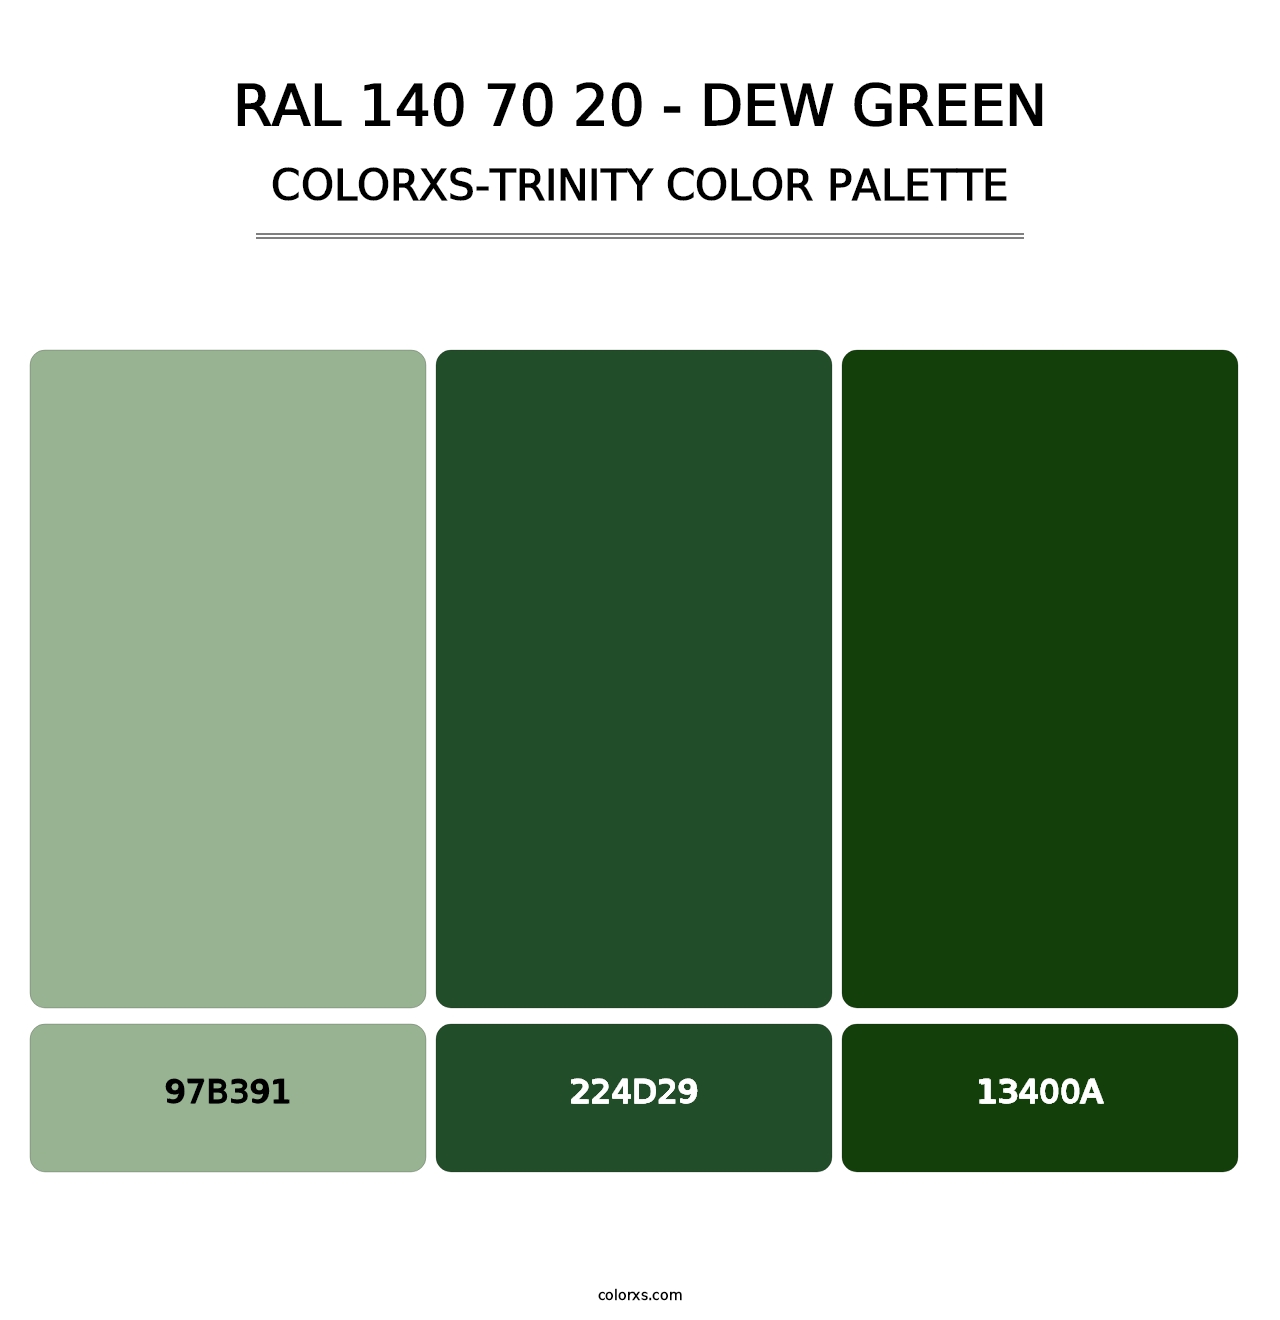 RAL 140 70 20 - Dew Green - Colorxs Trinity Palette